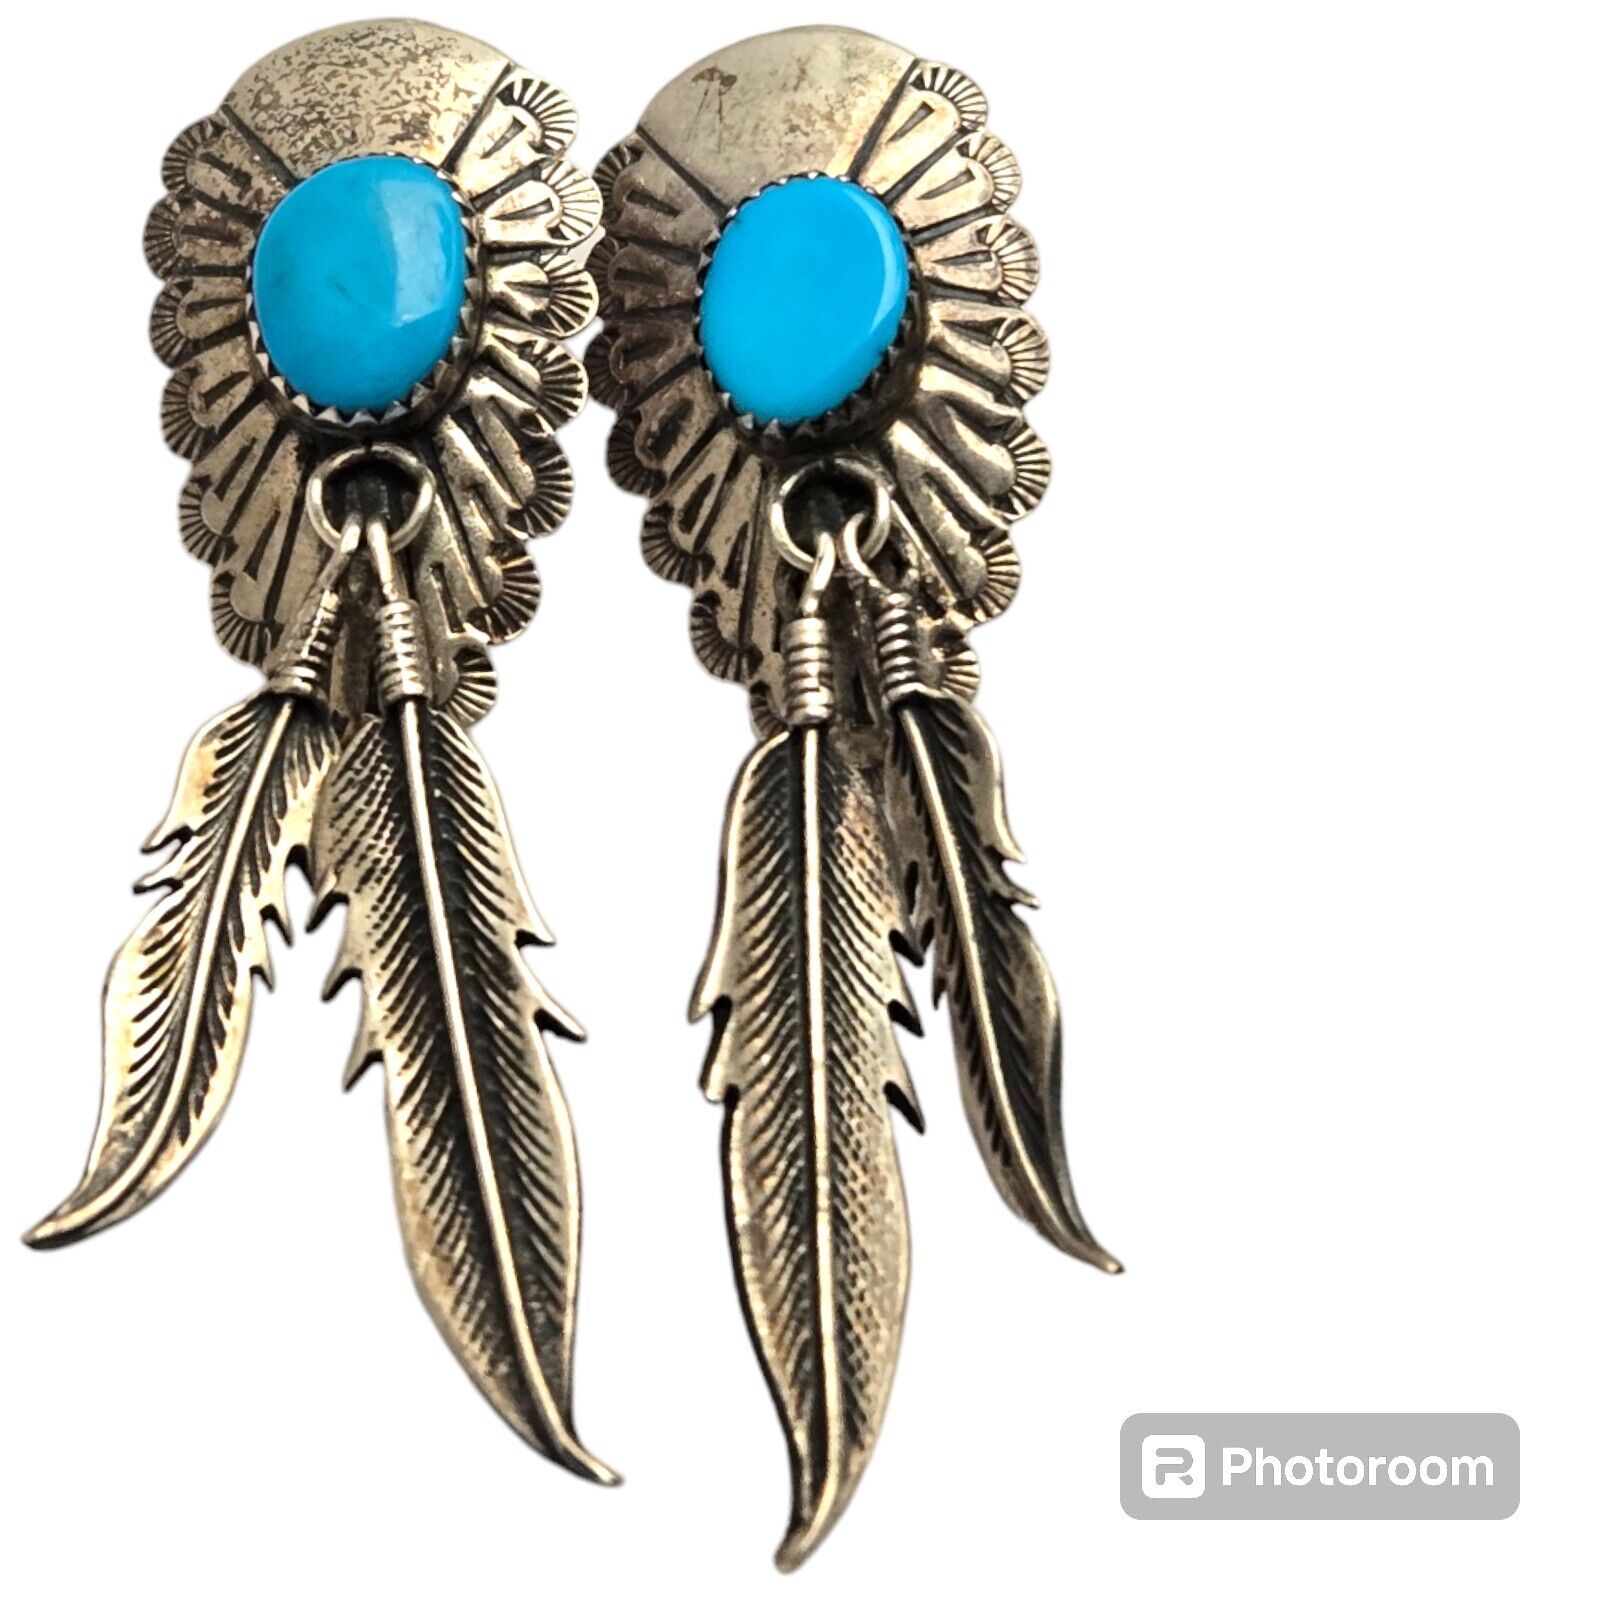 DETAILED NAVAJO Sleeping Beauty TURQUOISE STERLING SILVER Concho EARRINGS 